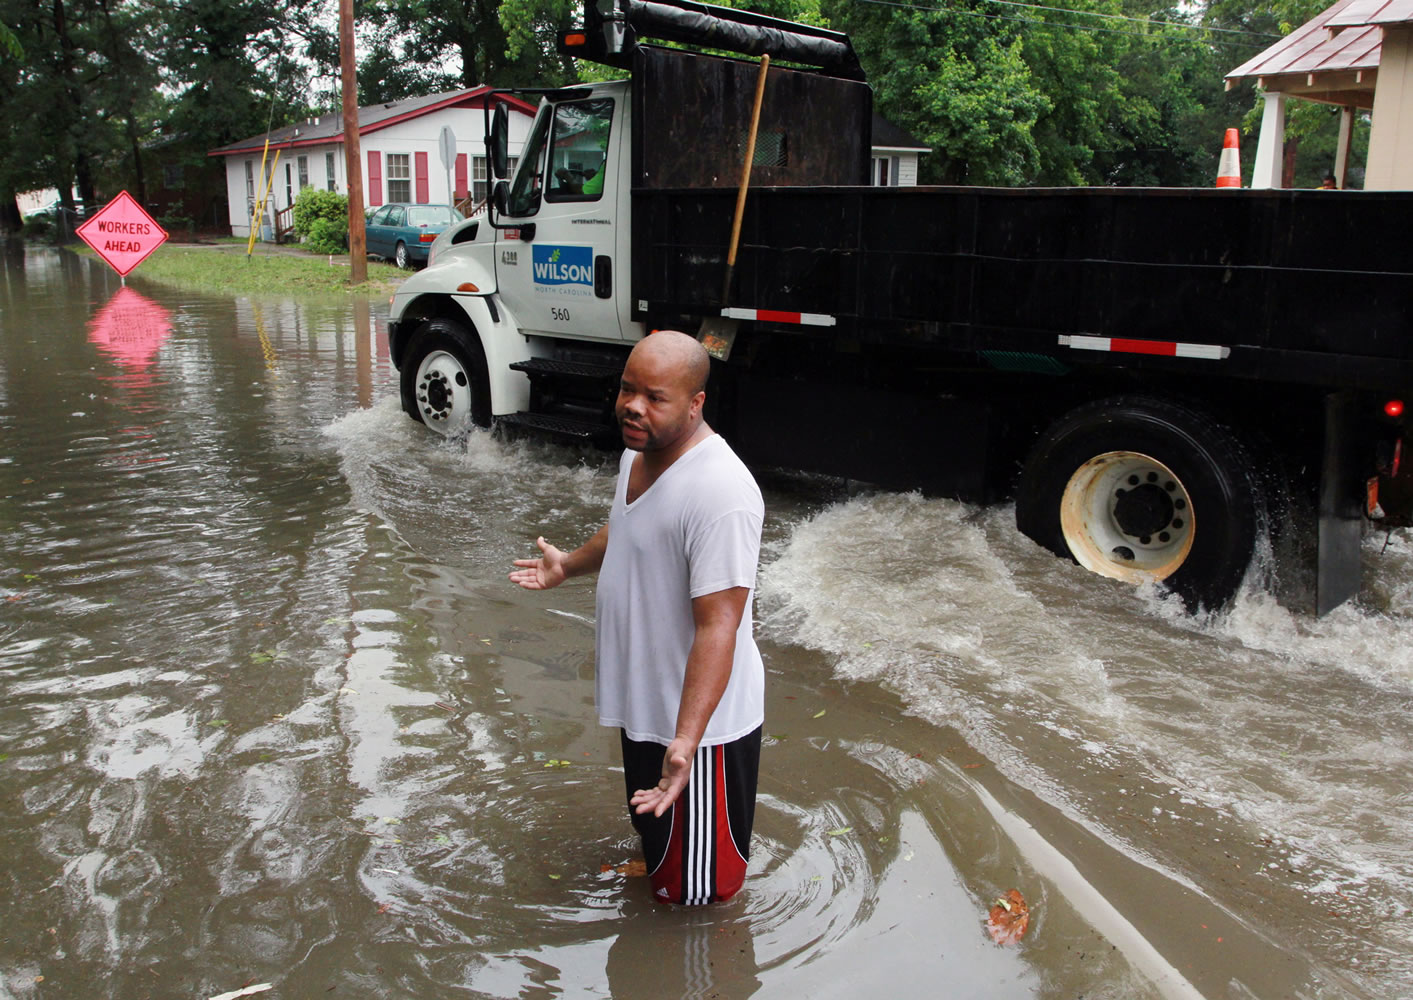 Ernest Lucas III attempts to walk through flooded sections of Singletary and Elvie streets as a city of Wilson truck drives through the area, Friday in Wilson, N.C.